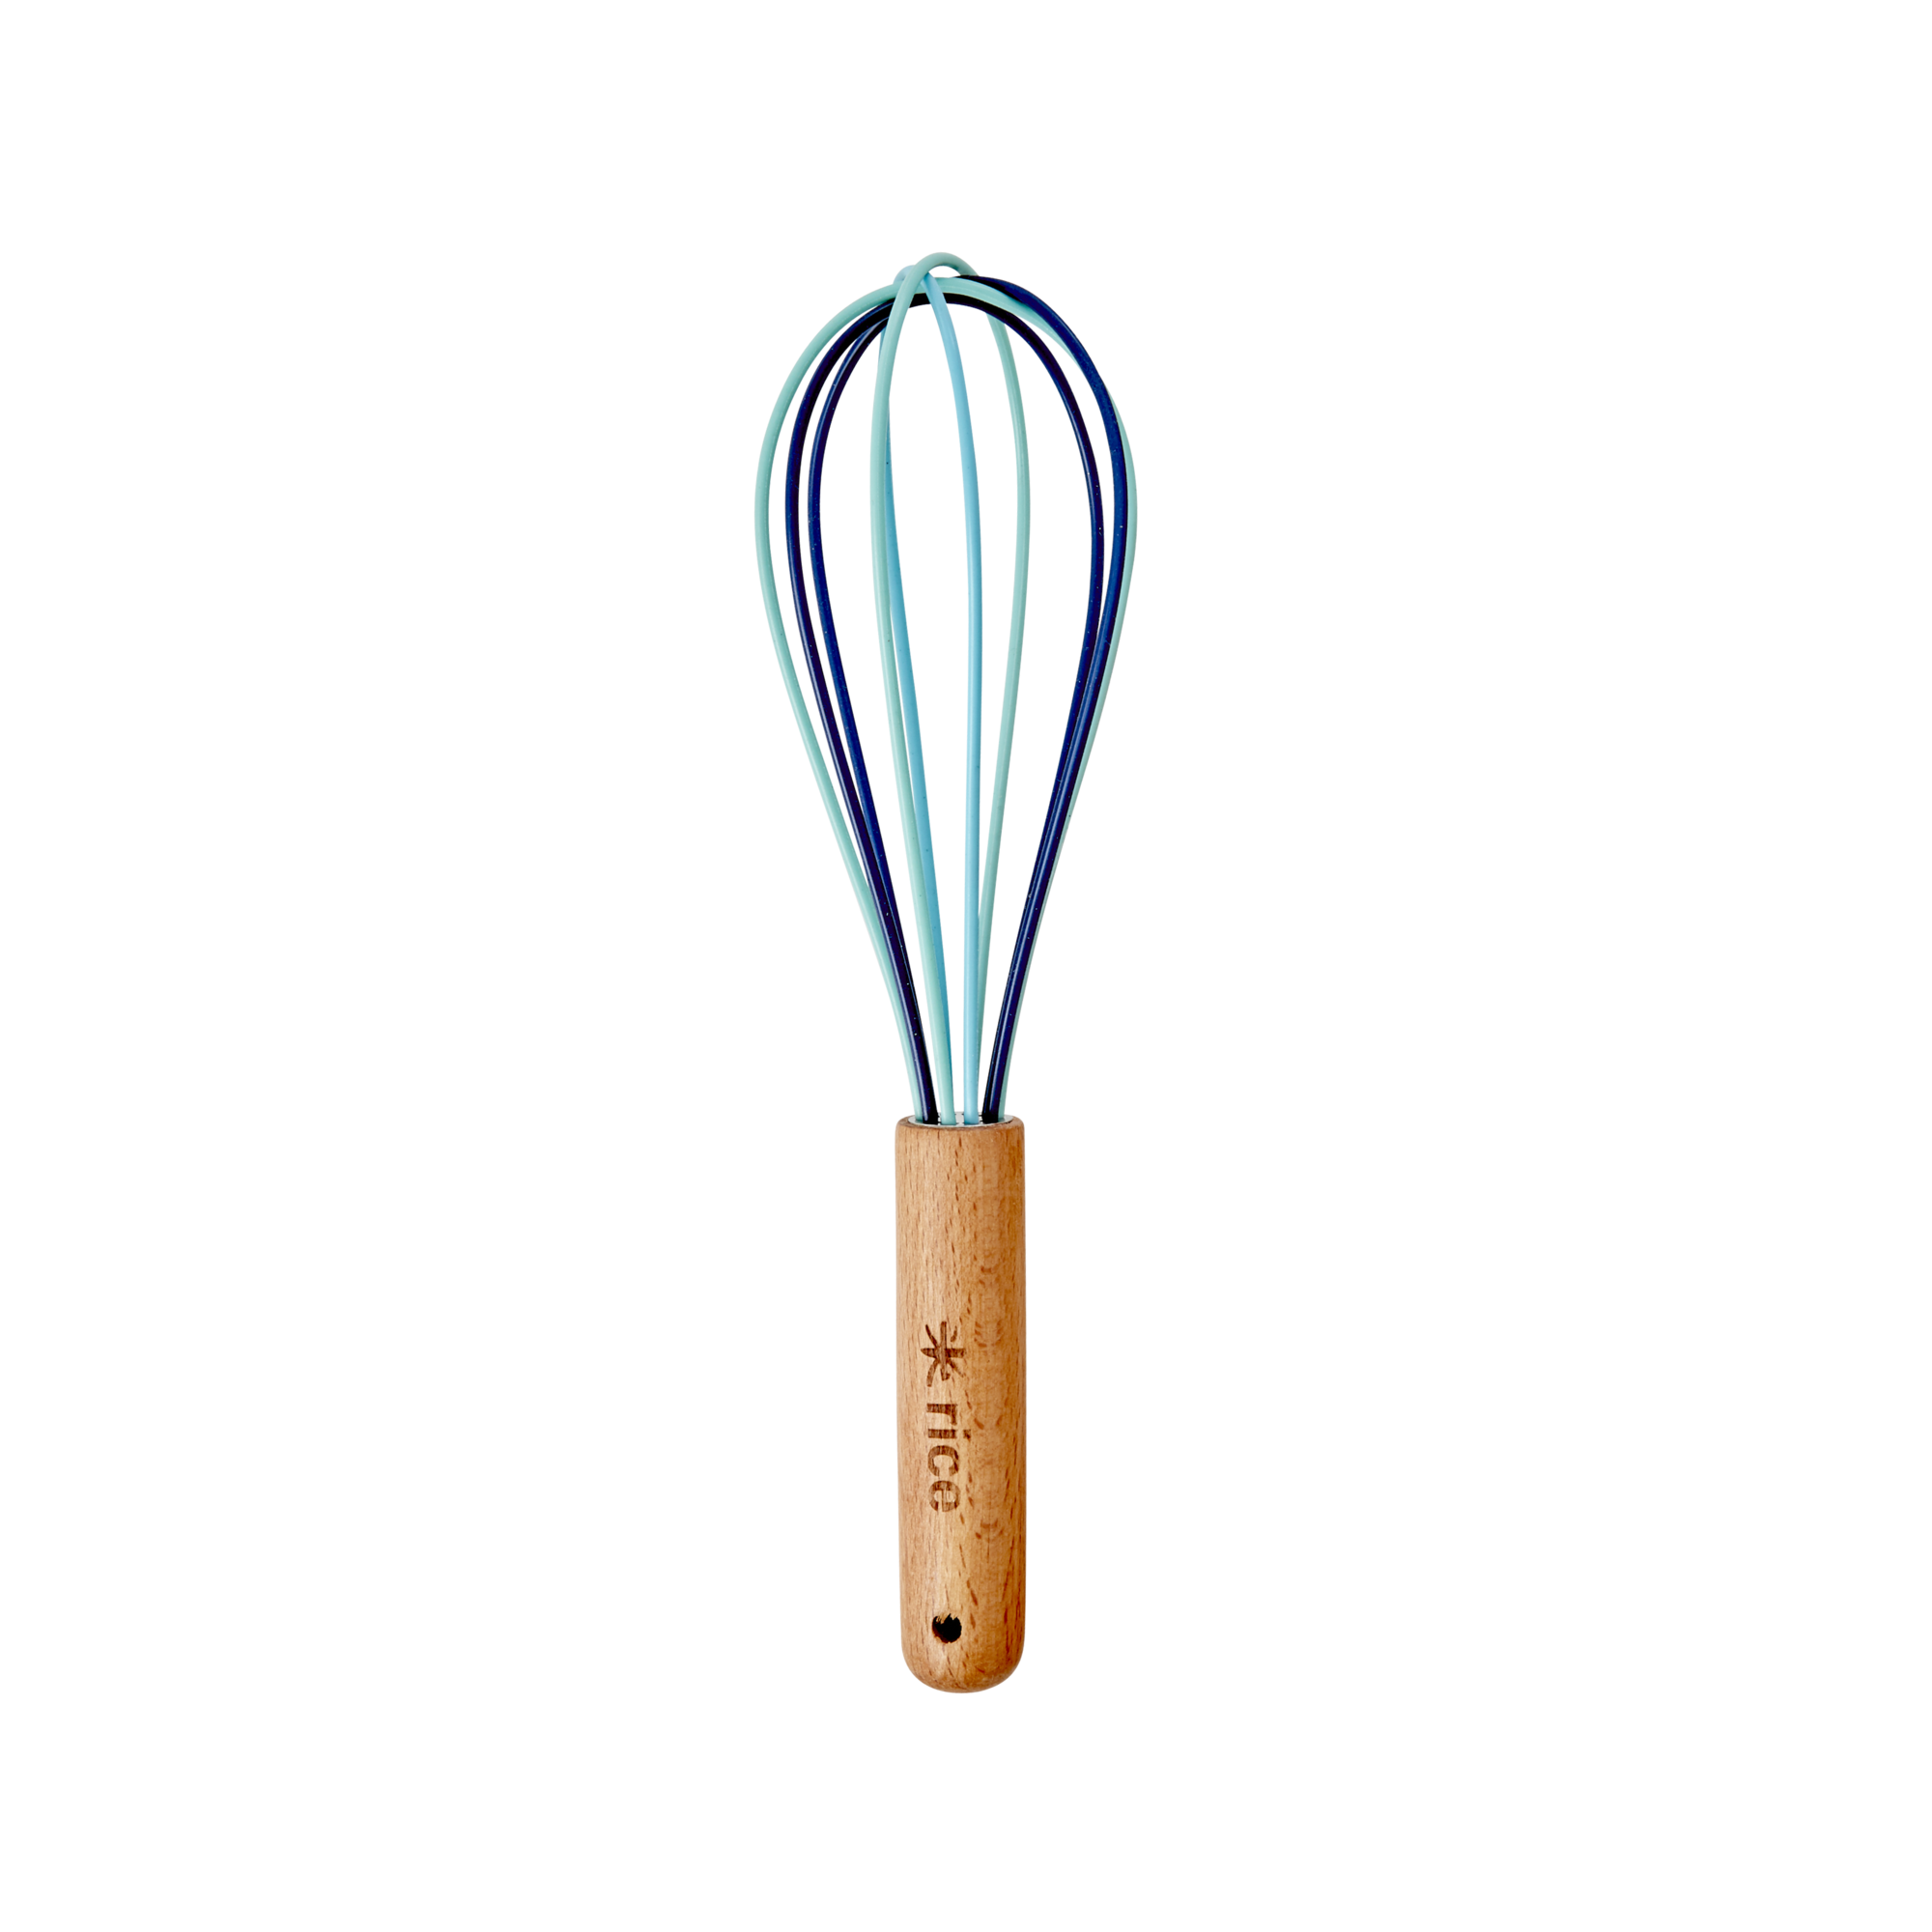 Rice - Silicone Whisk